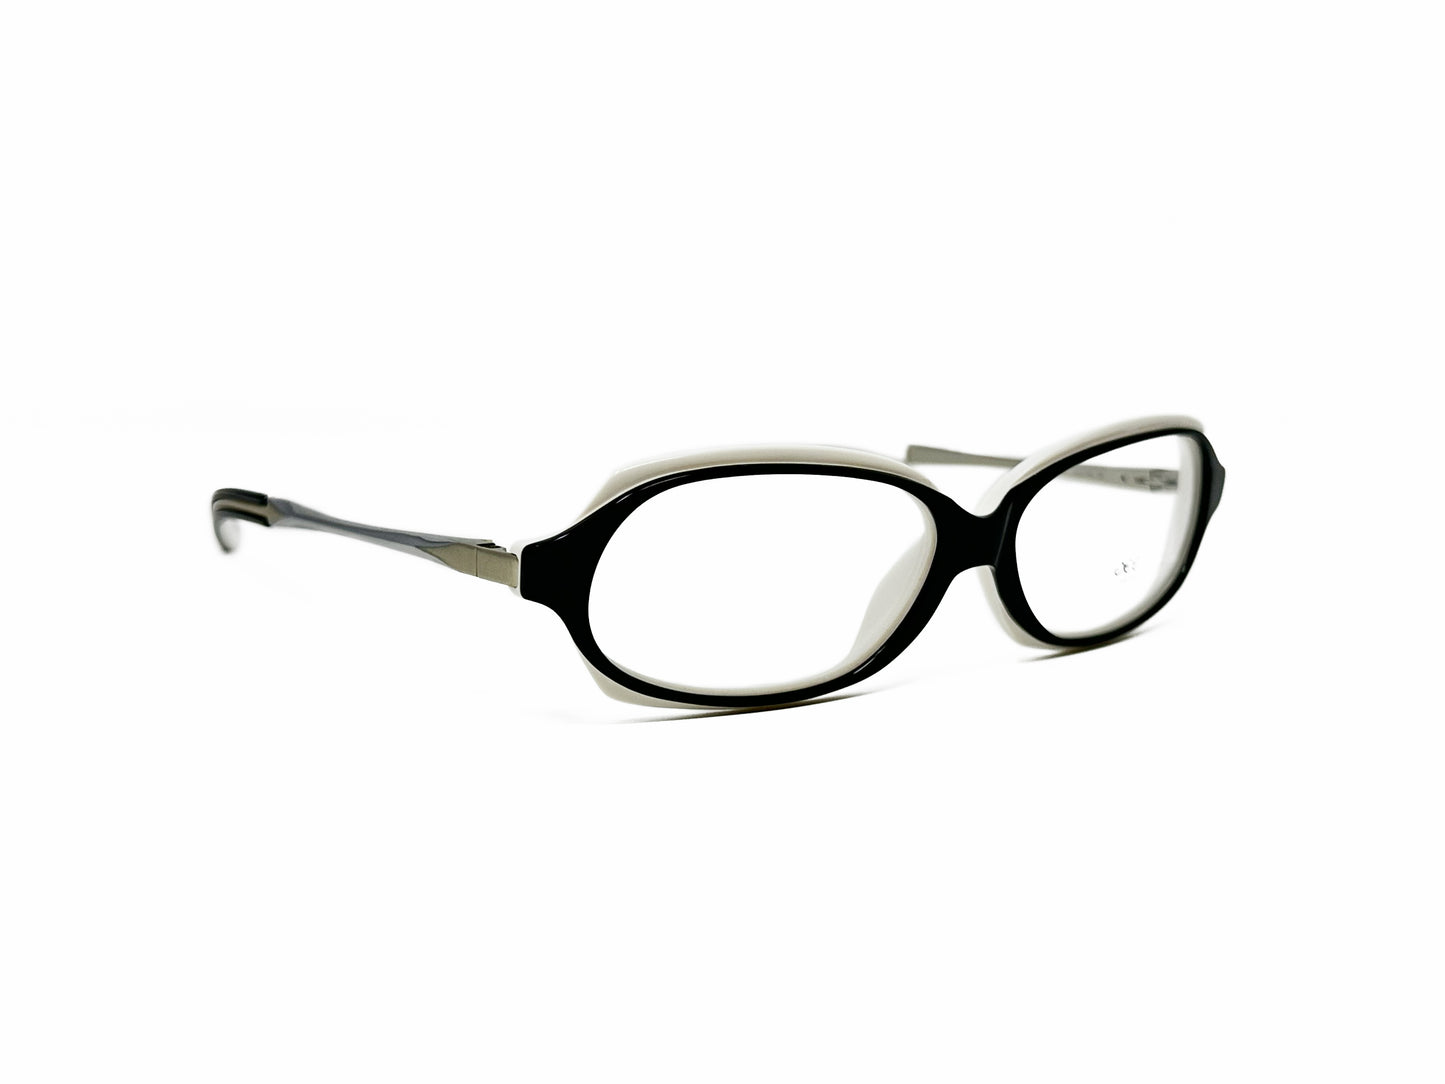 Gee Vice uplifted, curved, rectangular, optical frame with acetate front and metal temples. Model: Premiere. Color:Black with white trim. Side view.